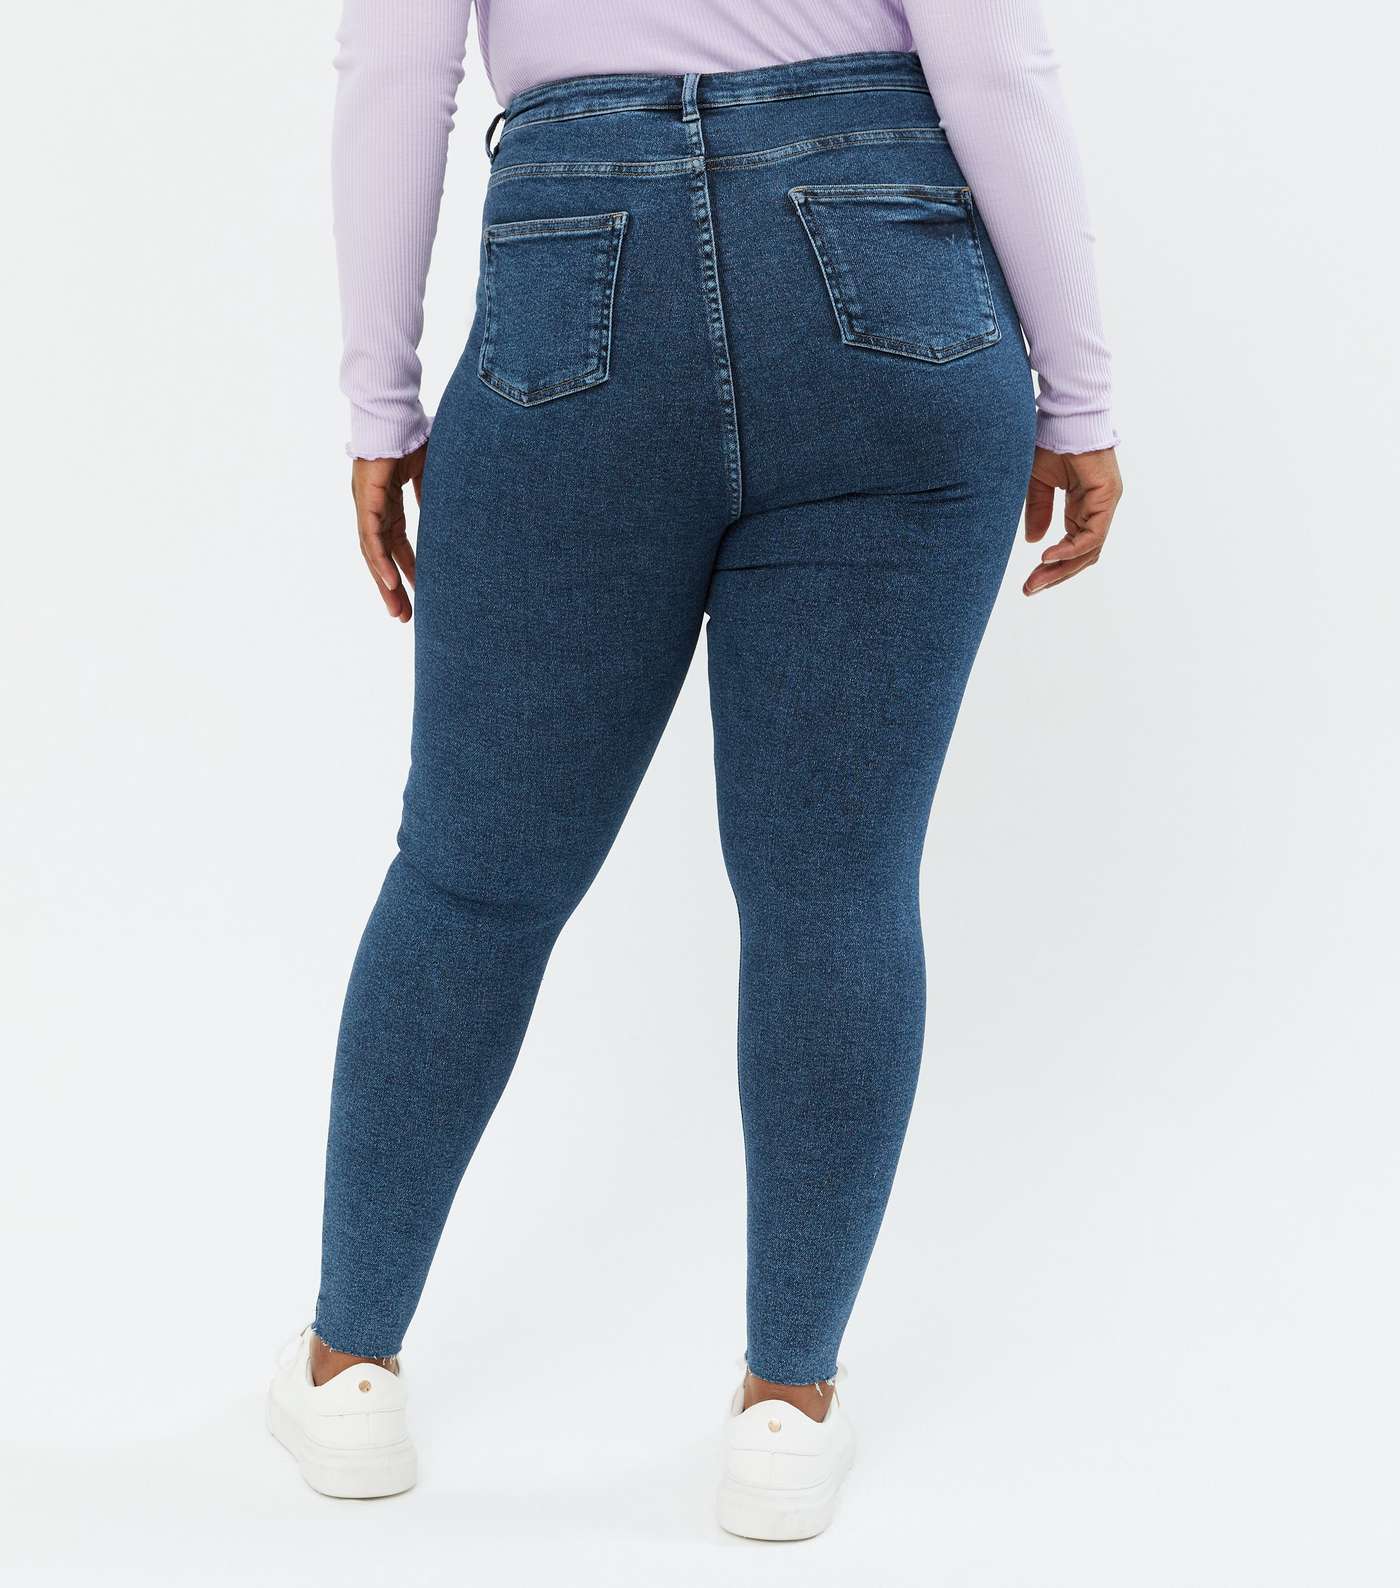 Curves Blue Rinse Wash Ripped High Waist Hallie Super Skinny Jeans Image 4